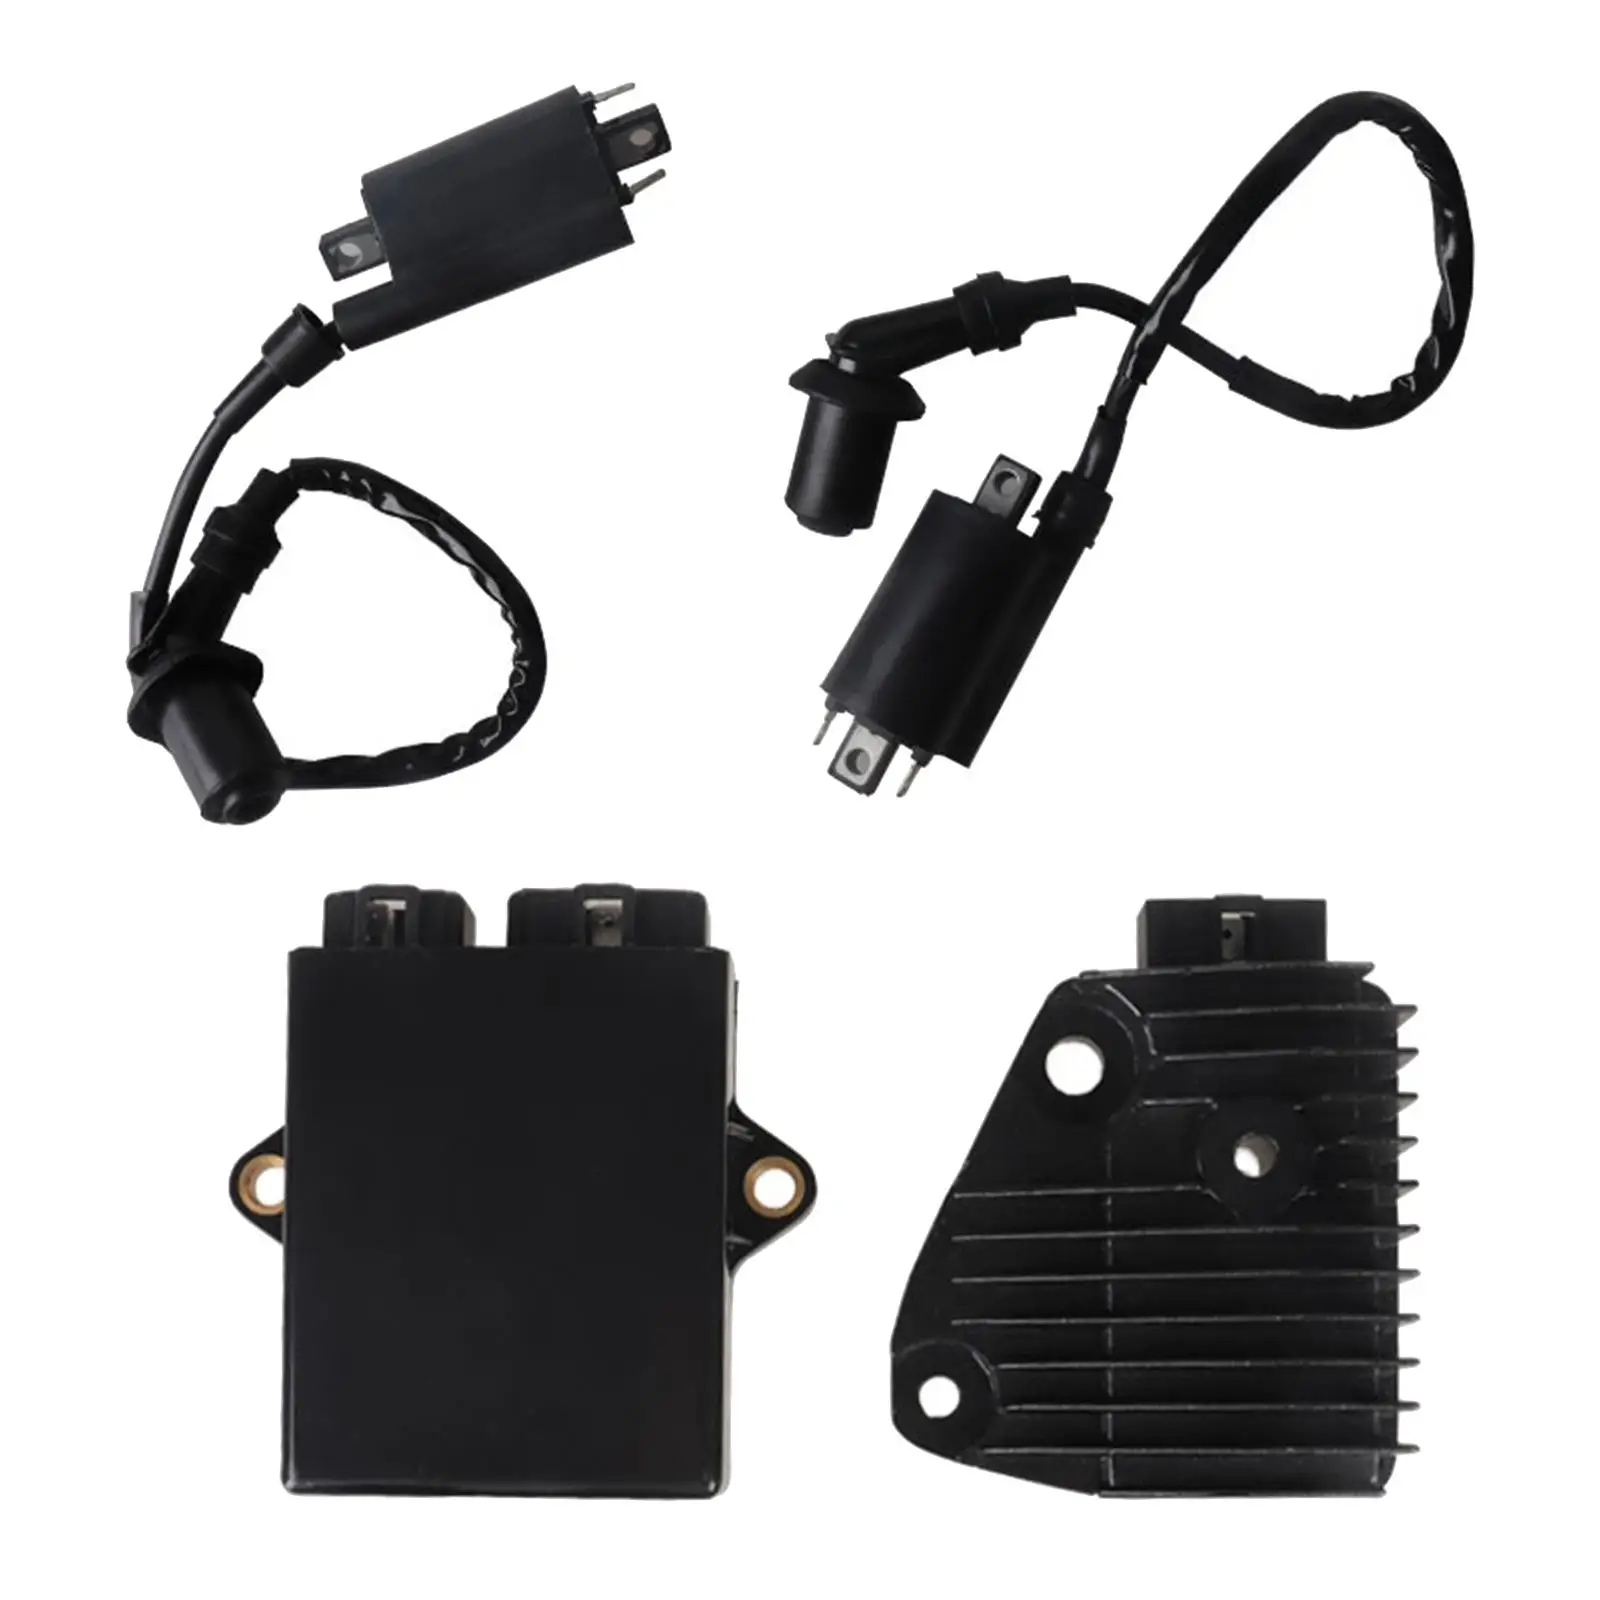 Cdi Ignition Coil Regulator High Performance Motorcycle Parts Replacement for Yamaha XV250 Route 66 XV250 Virago V-star 250